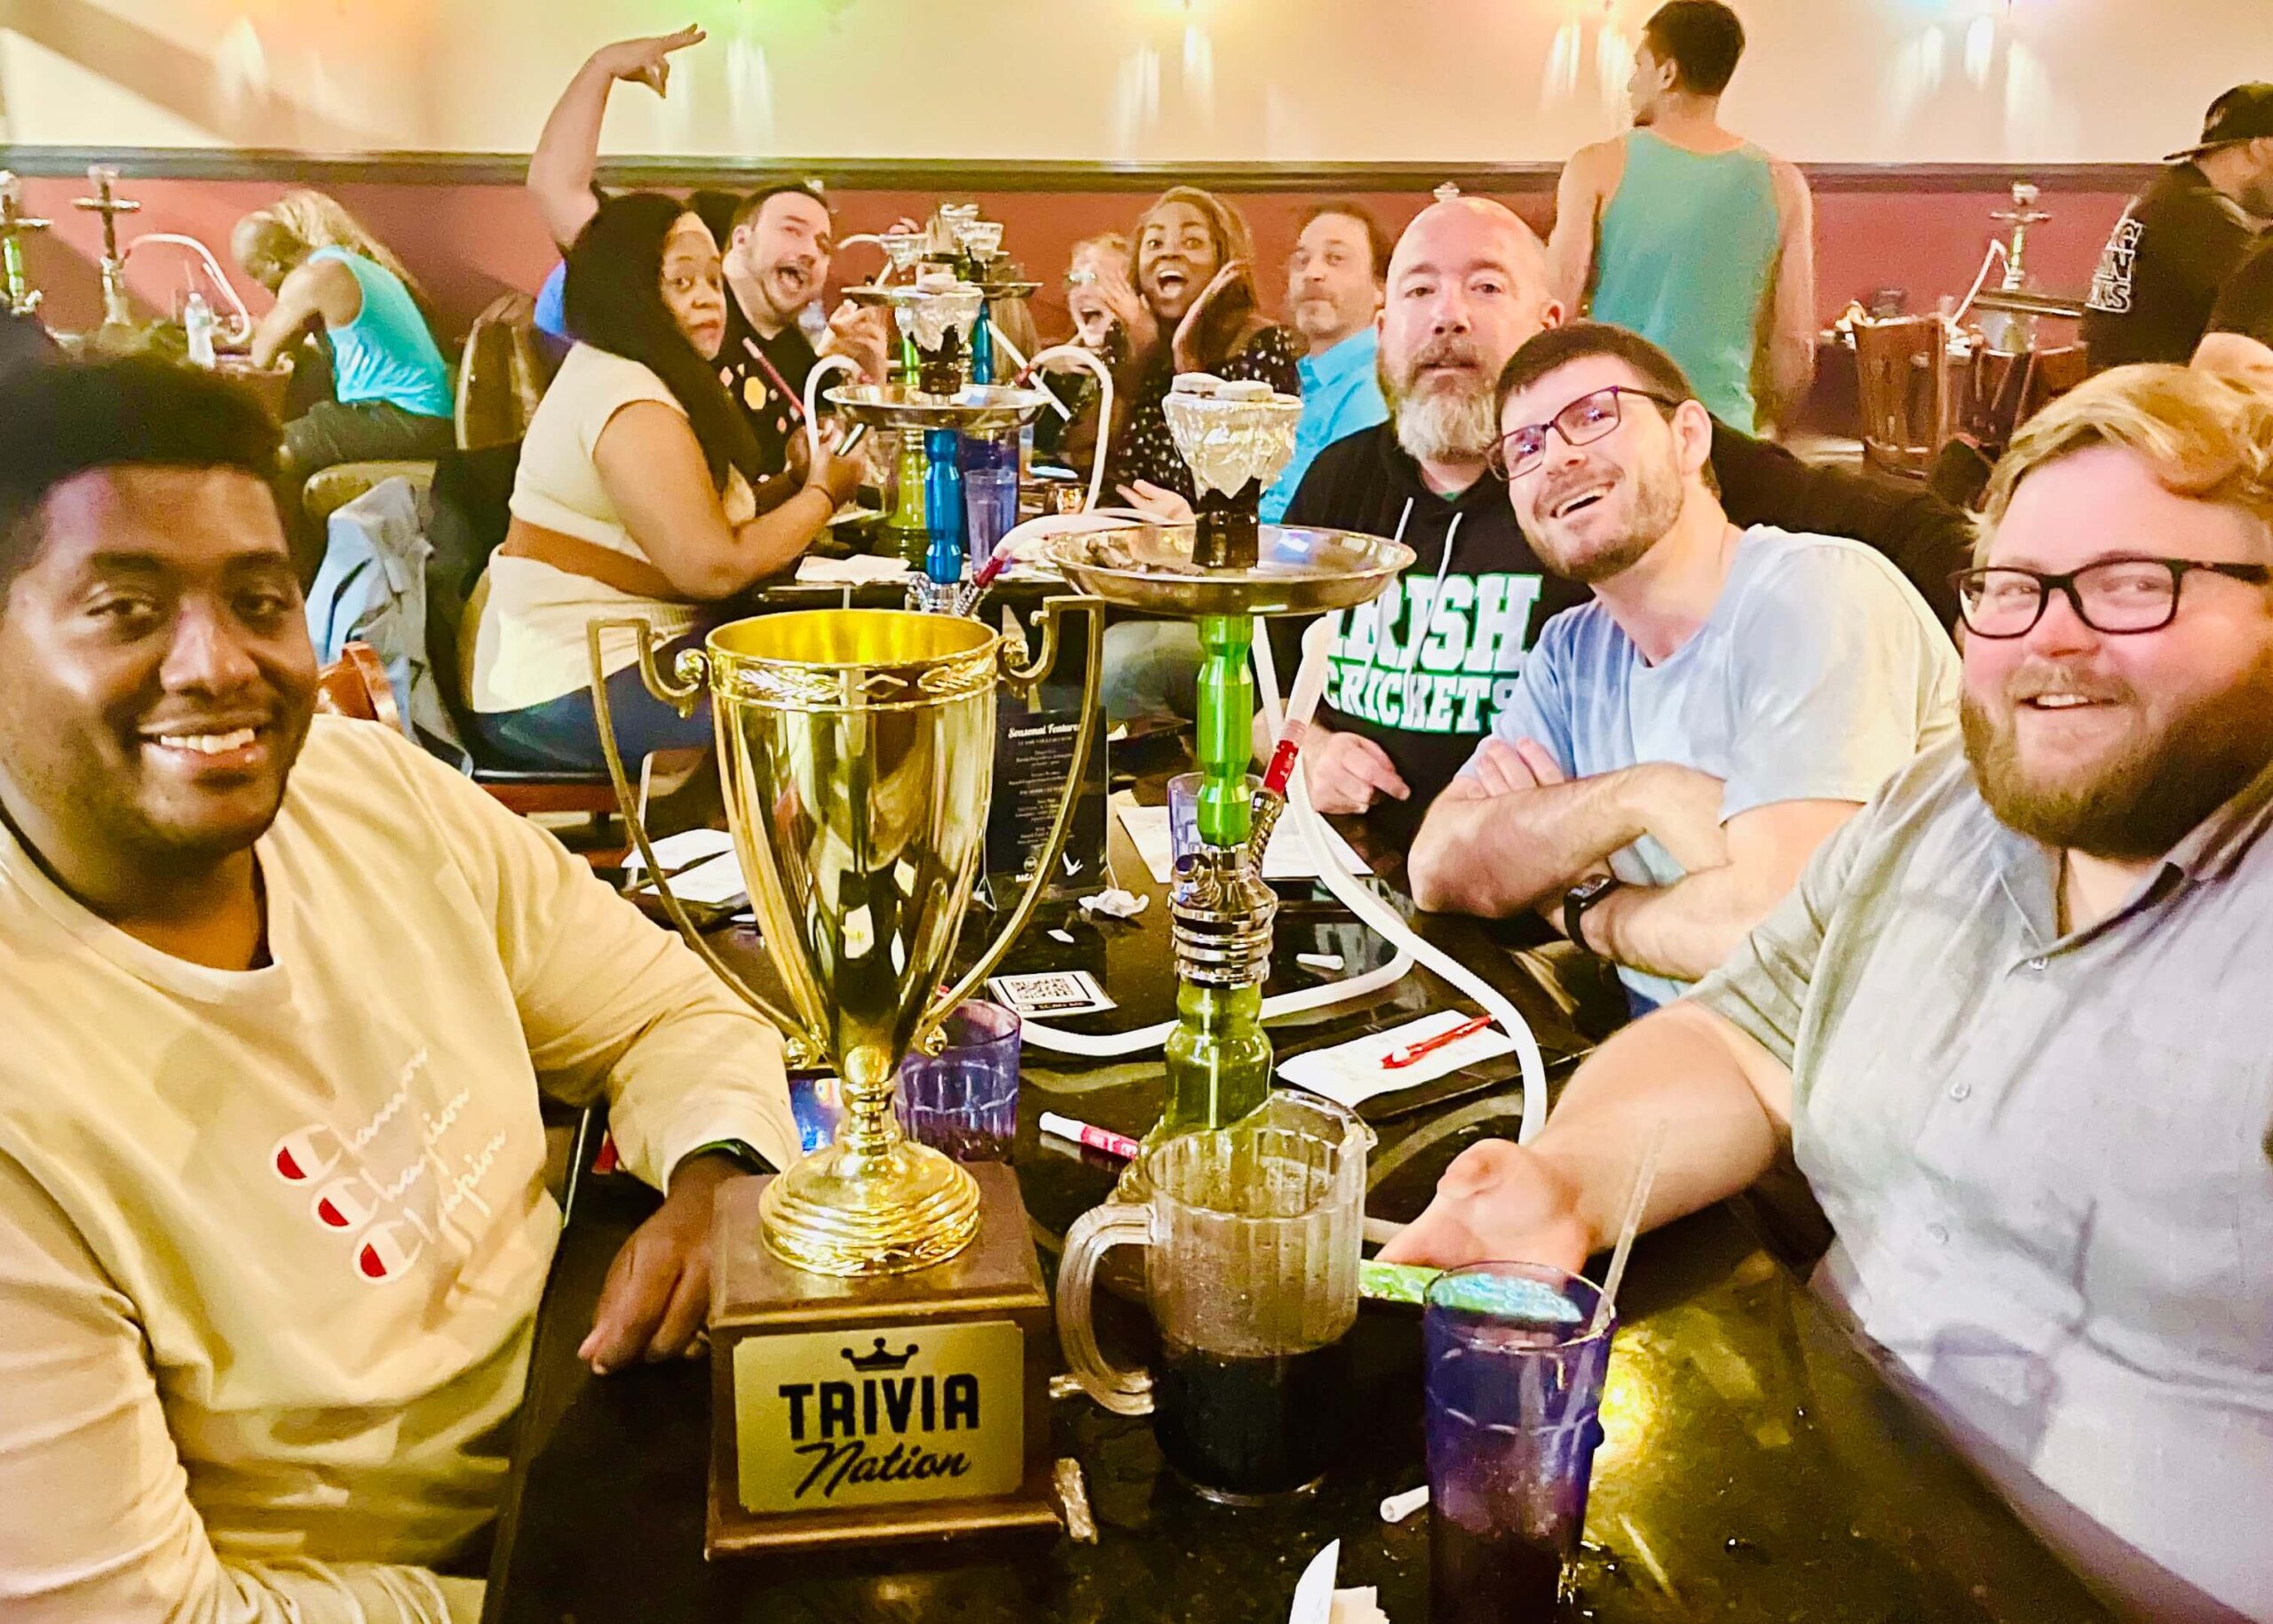 Sahara Cafe & Bar Jacksonville FL 32246 trivia night: table of four men smiling with a Trivia Nation trophy and a hookah with a table full of people also behind them celebrating